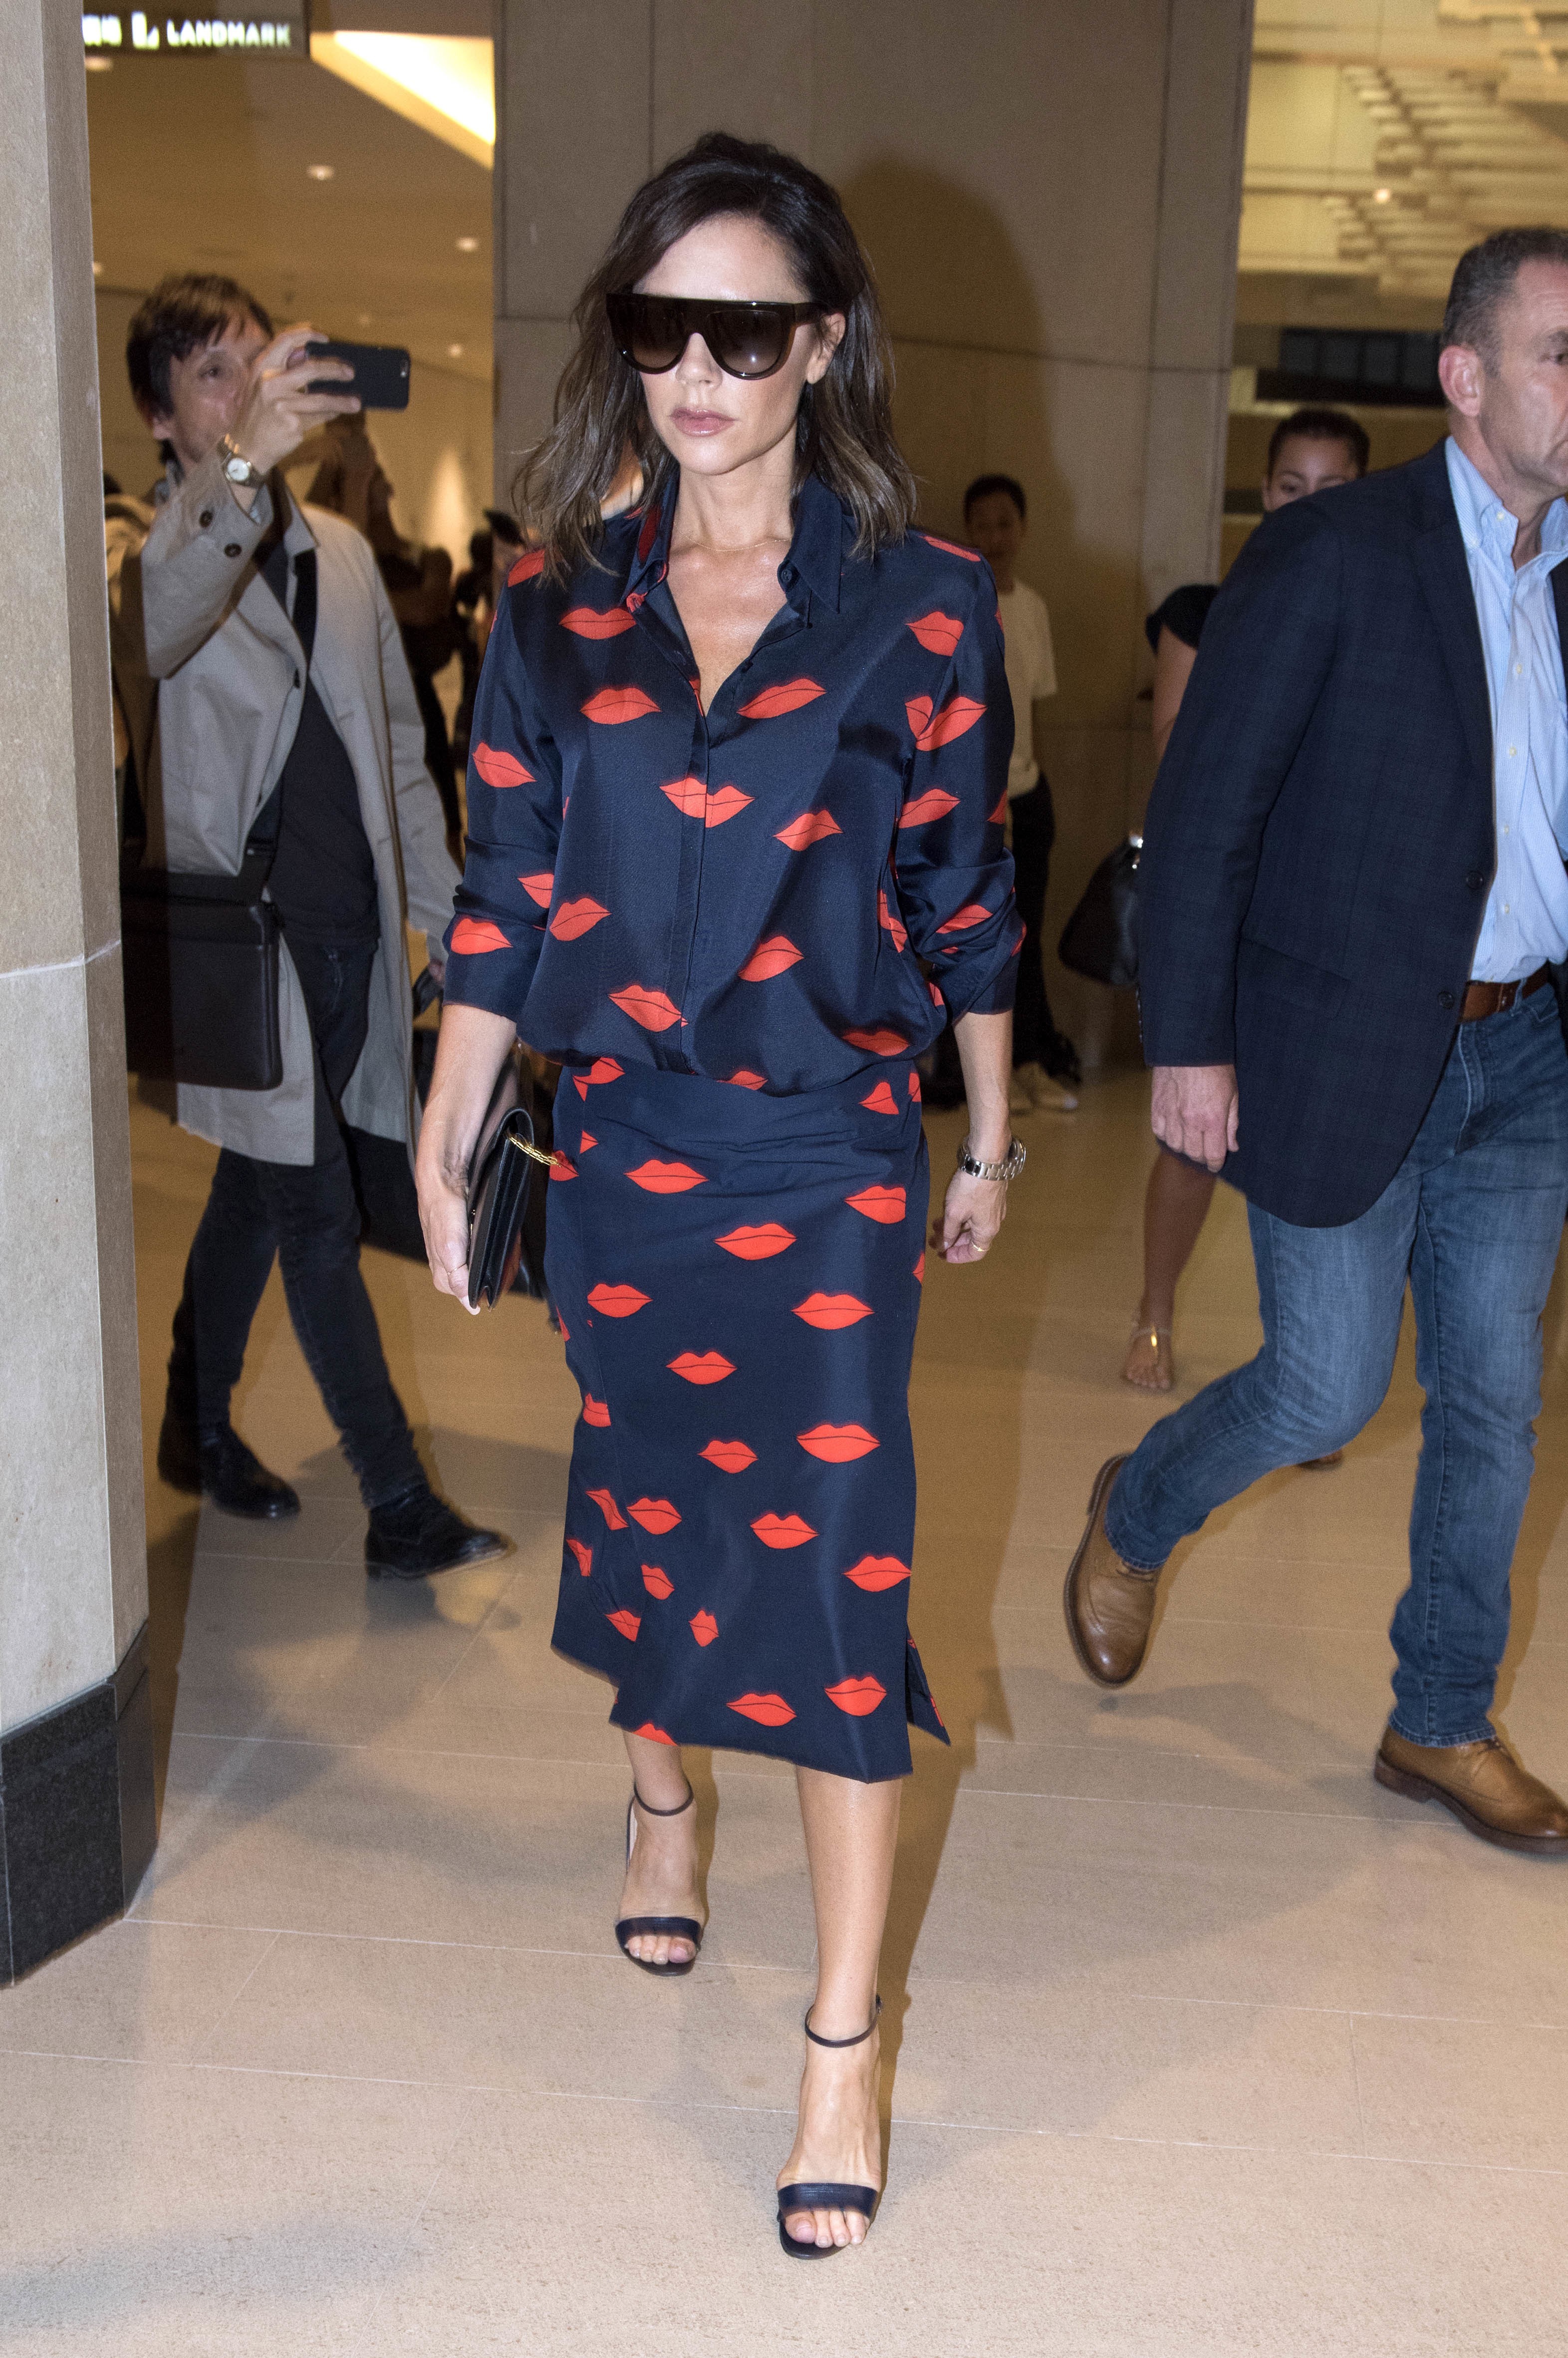 Posh Spice Meanders Around Town Looking Posh and/or Spicy - Go Fug Yourself